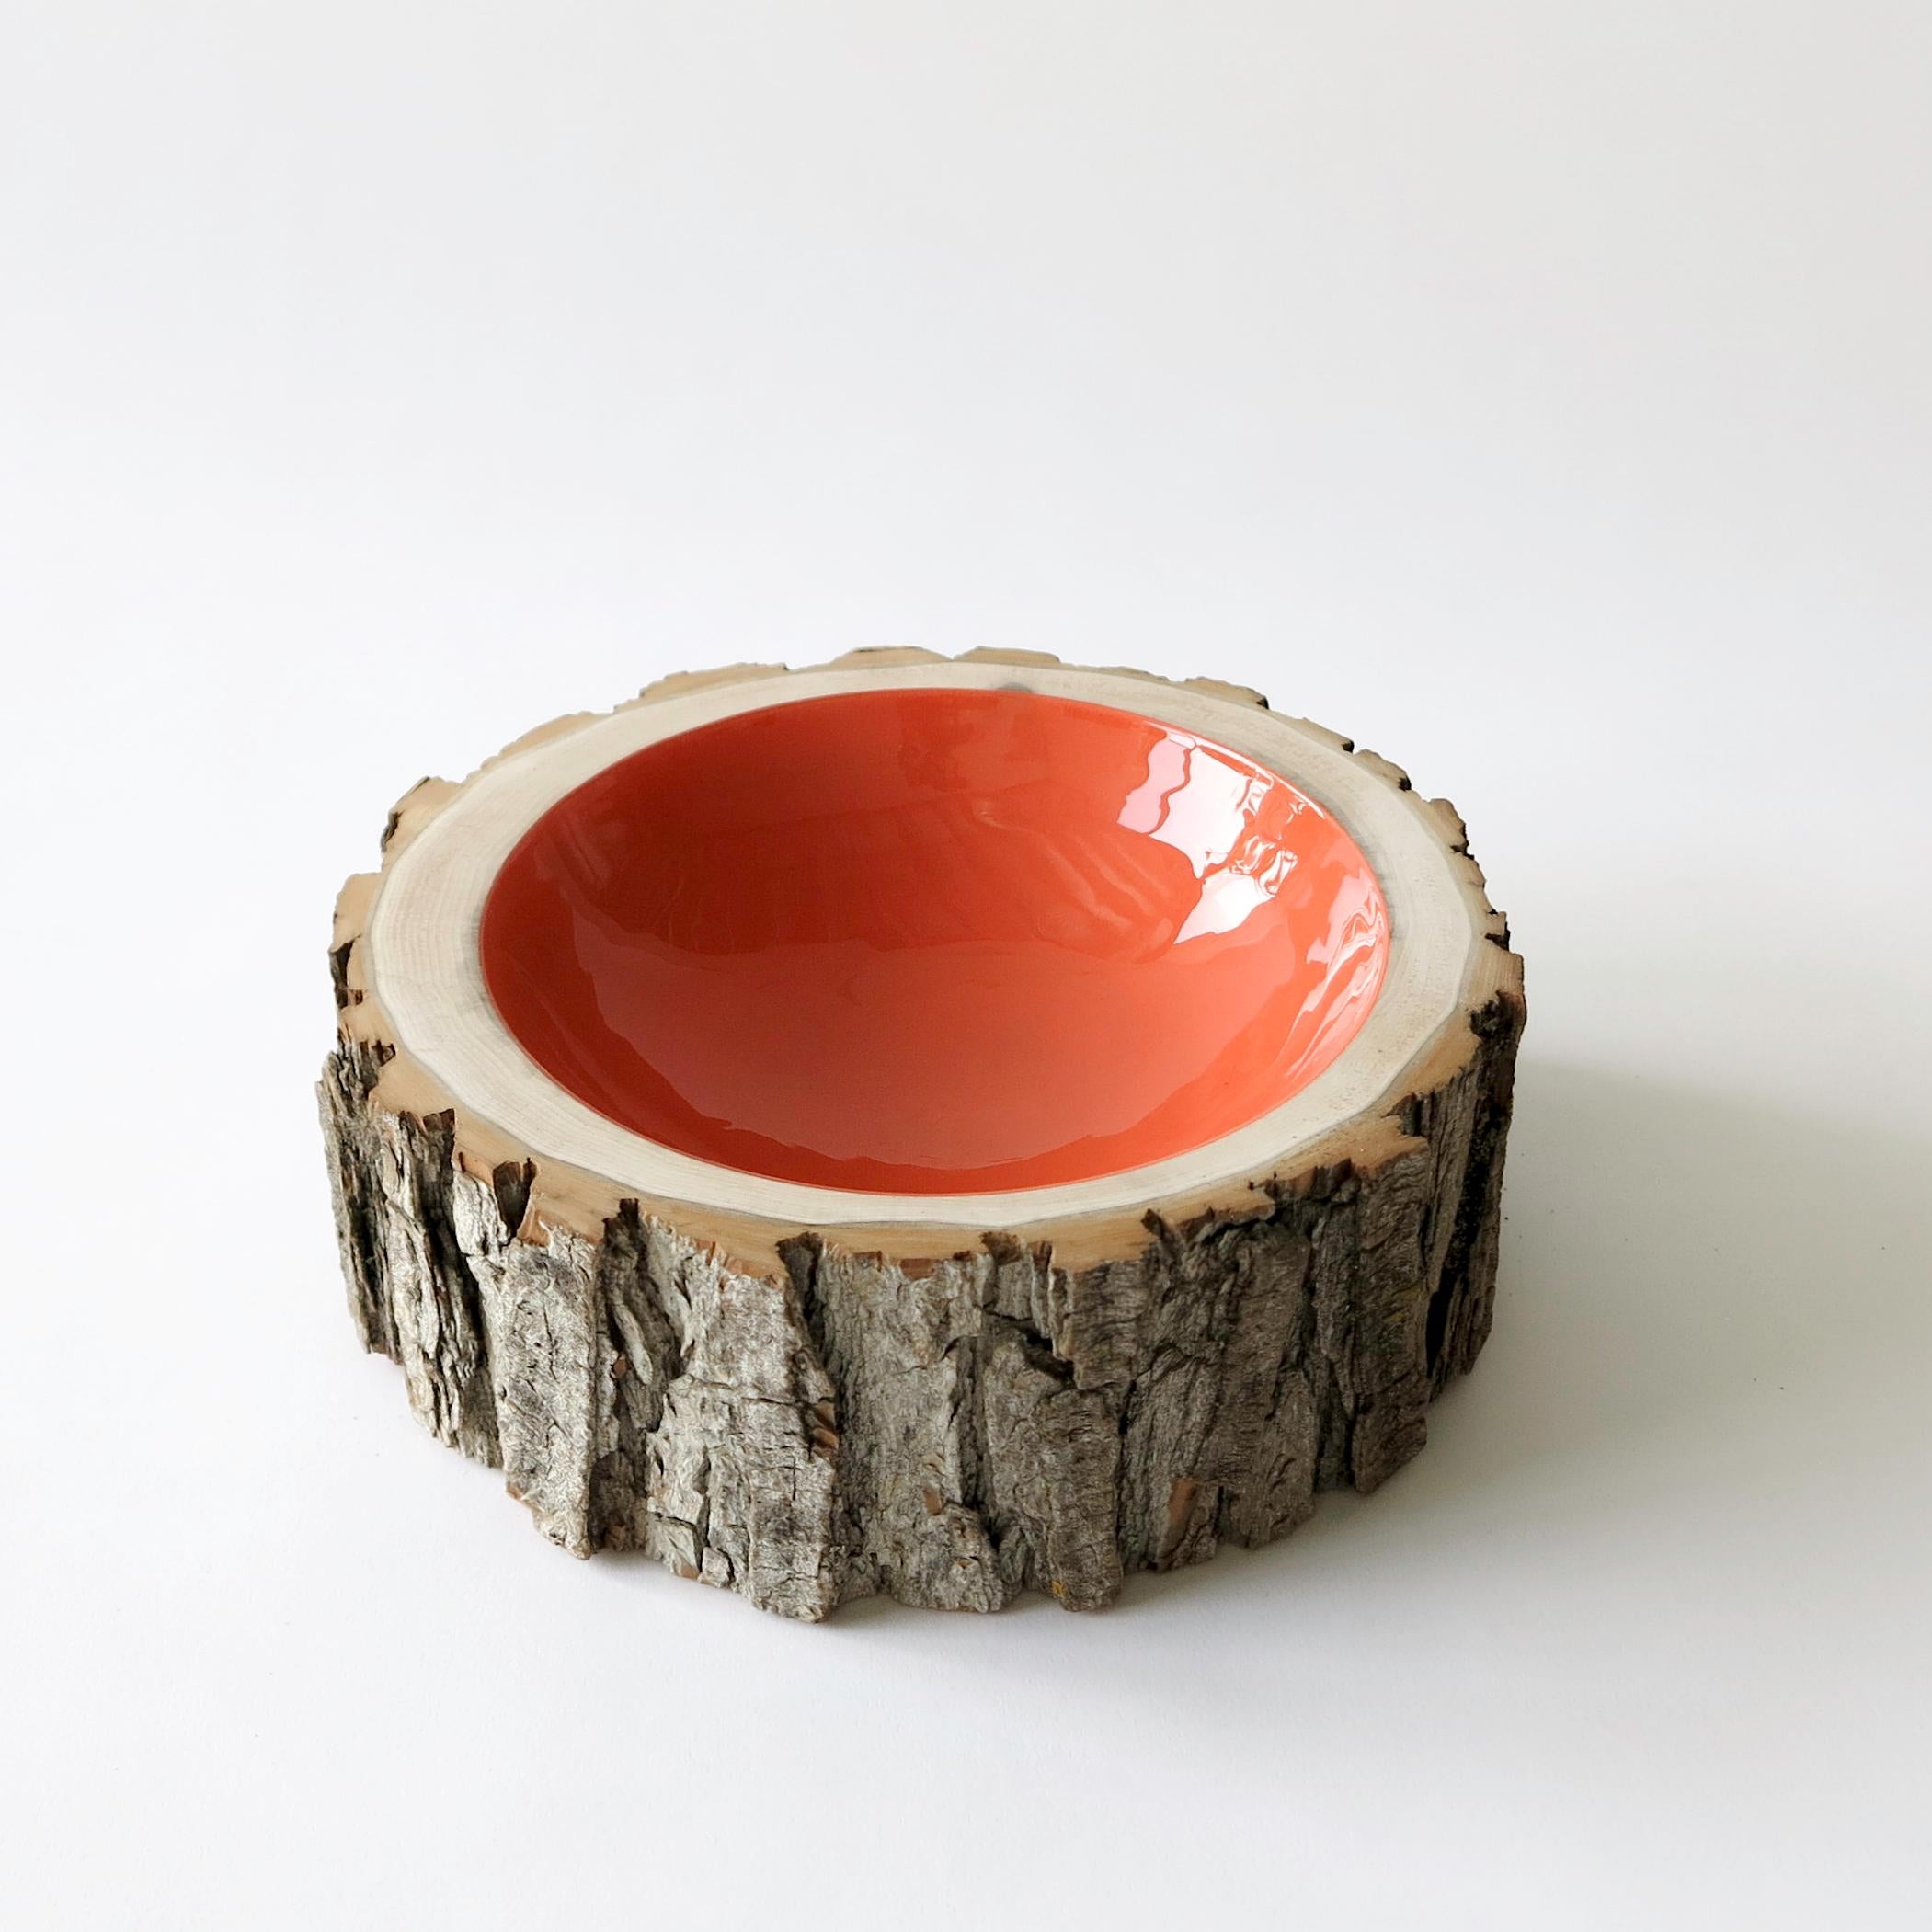 Log Bowls combine the beauty of a tree in its natural state with a high-gloss, vibrant finish. Each bowl is handmade using locally reclaimed trees of all varieties (fallen or cut down due to infrastructure or inclement weather). The trees are hand